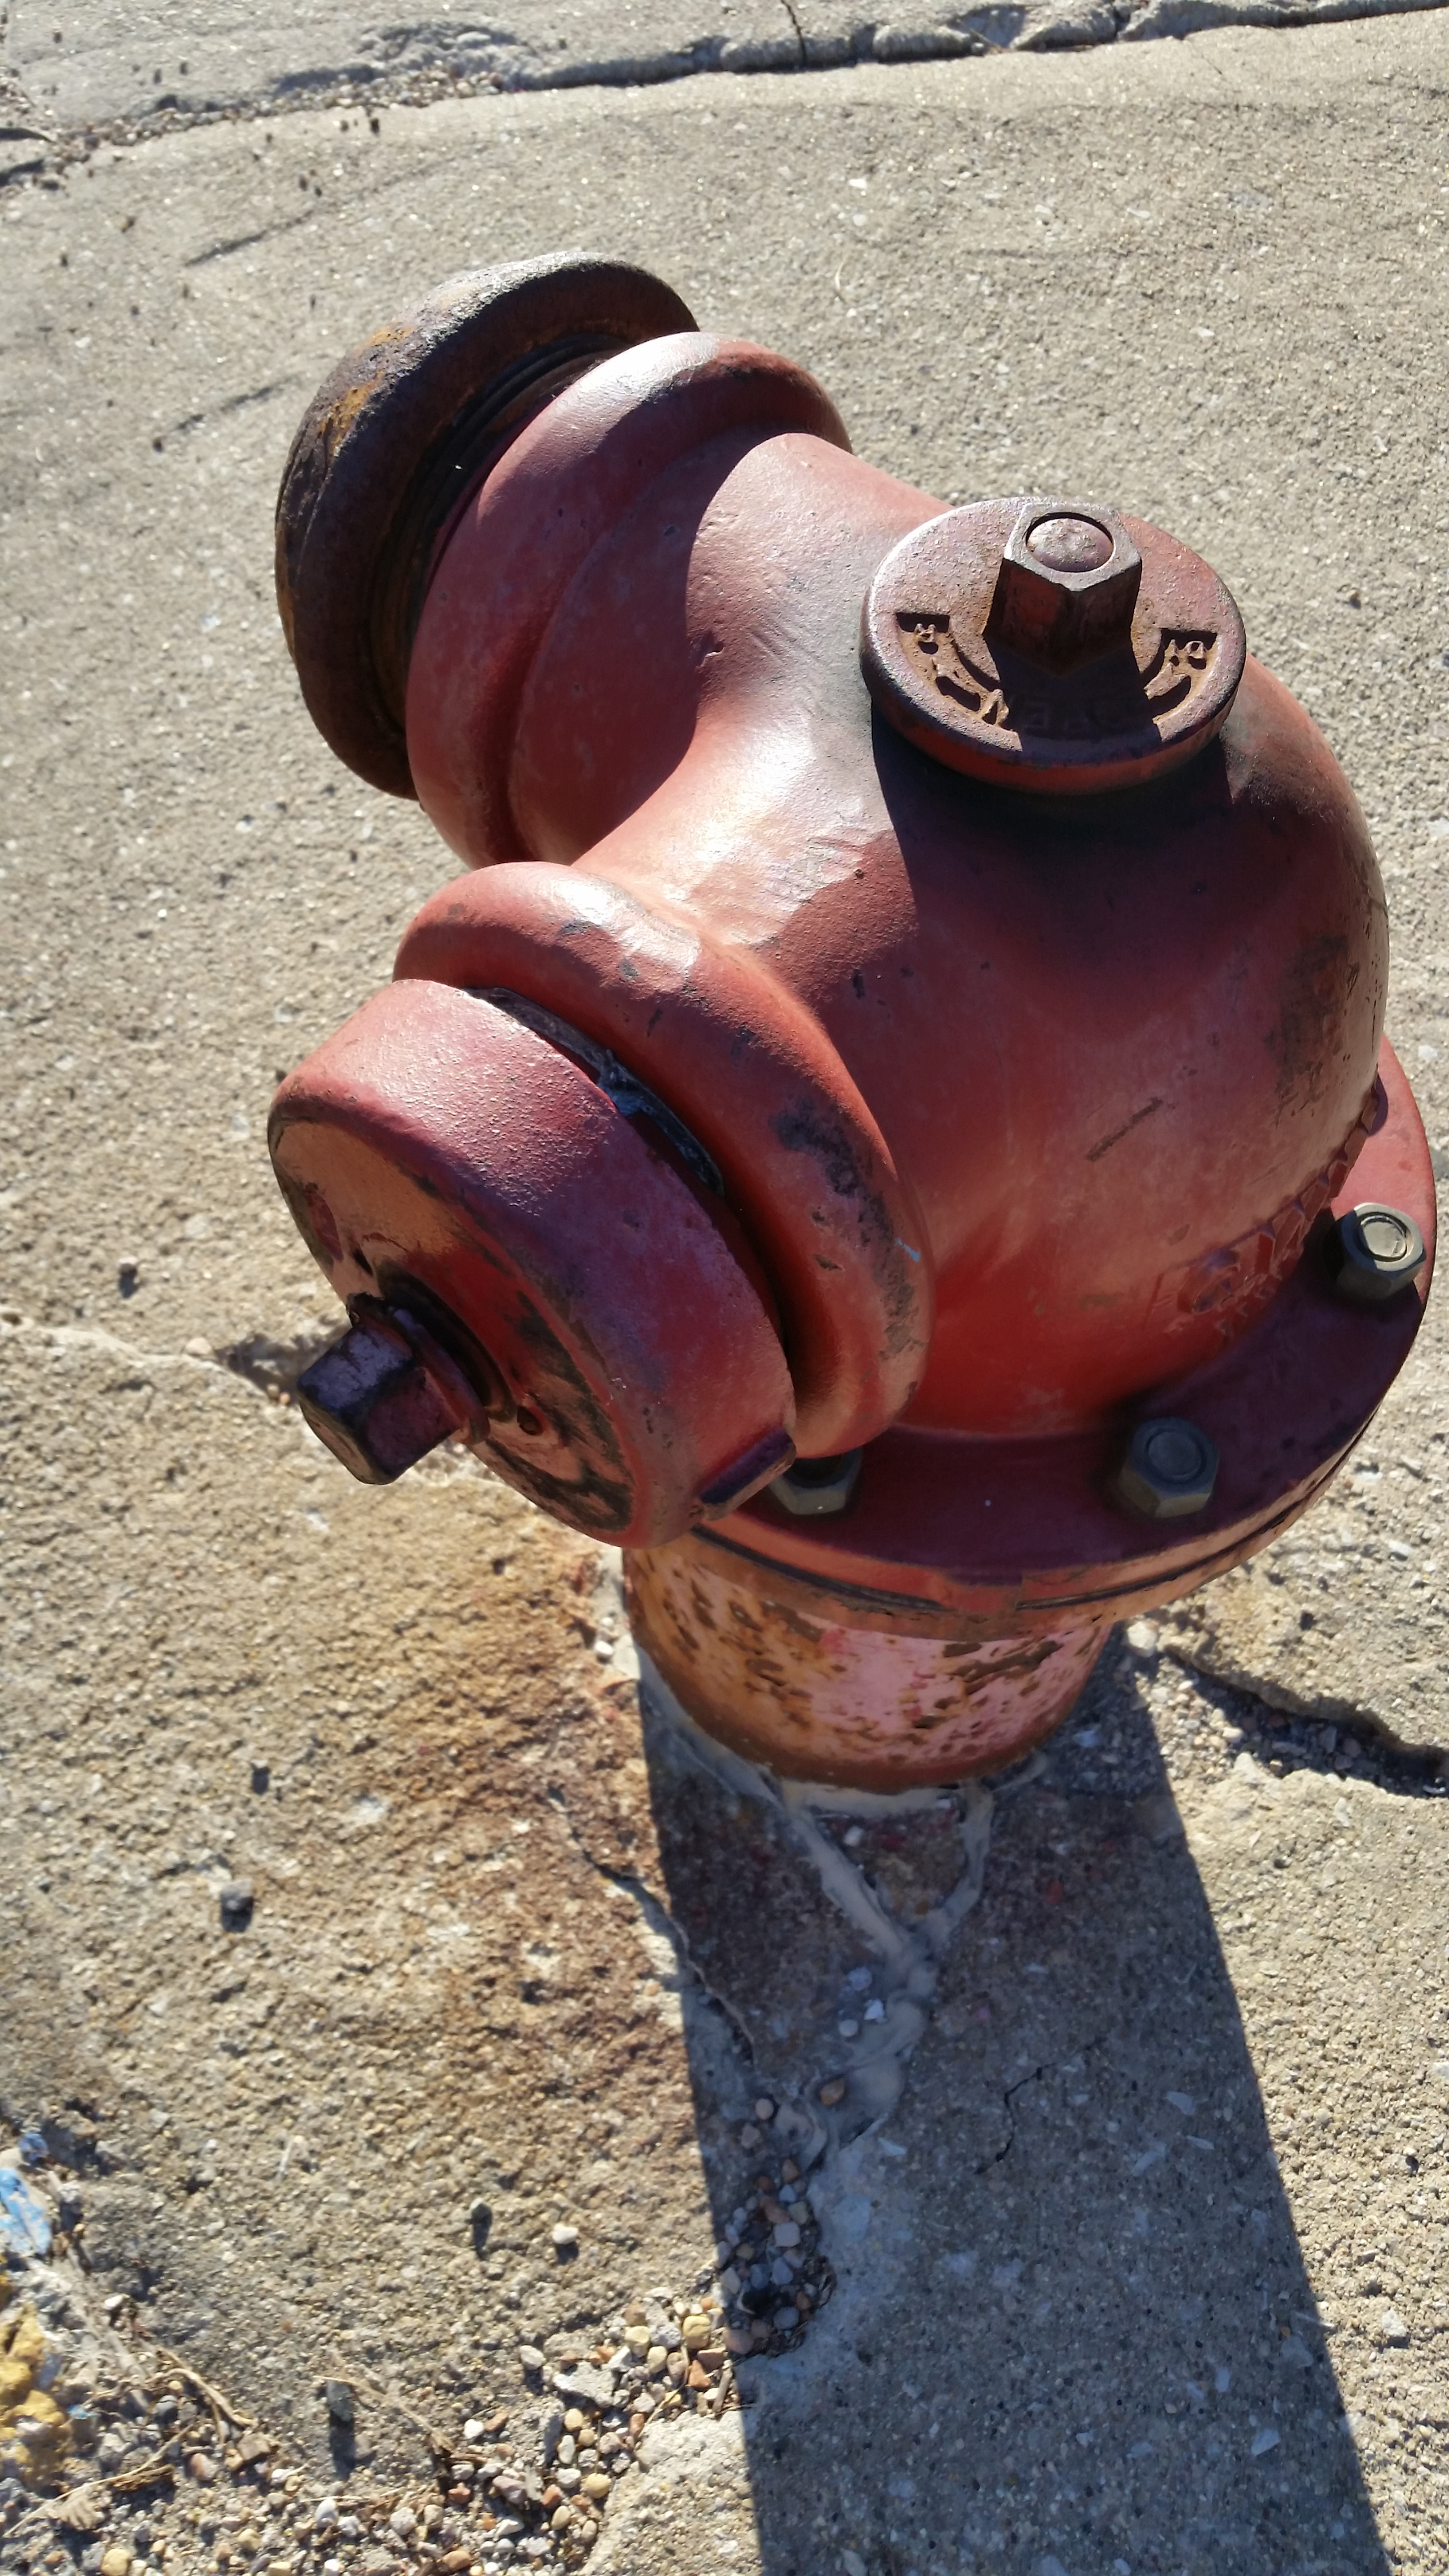 Technical Assistance Program Available for Hydrant Access Permit